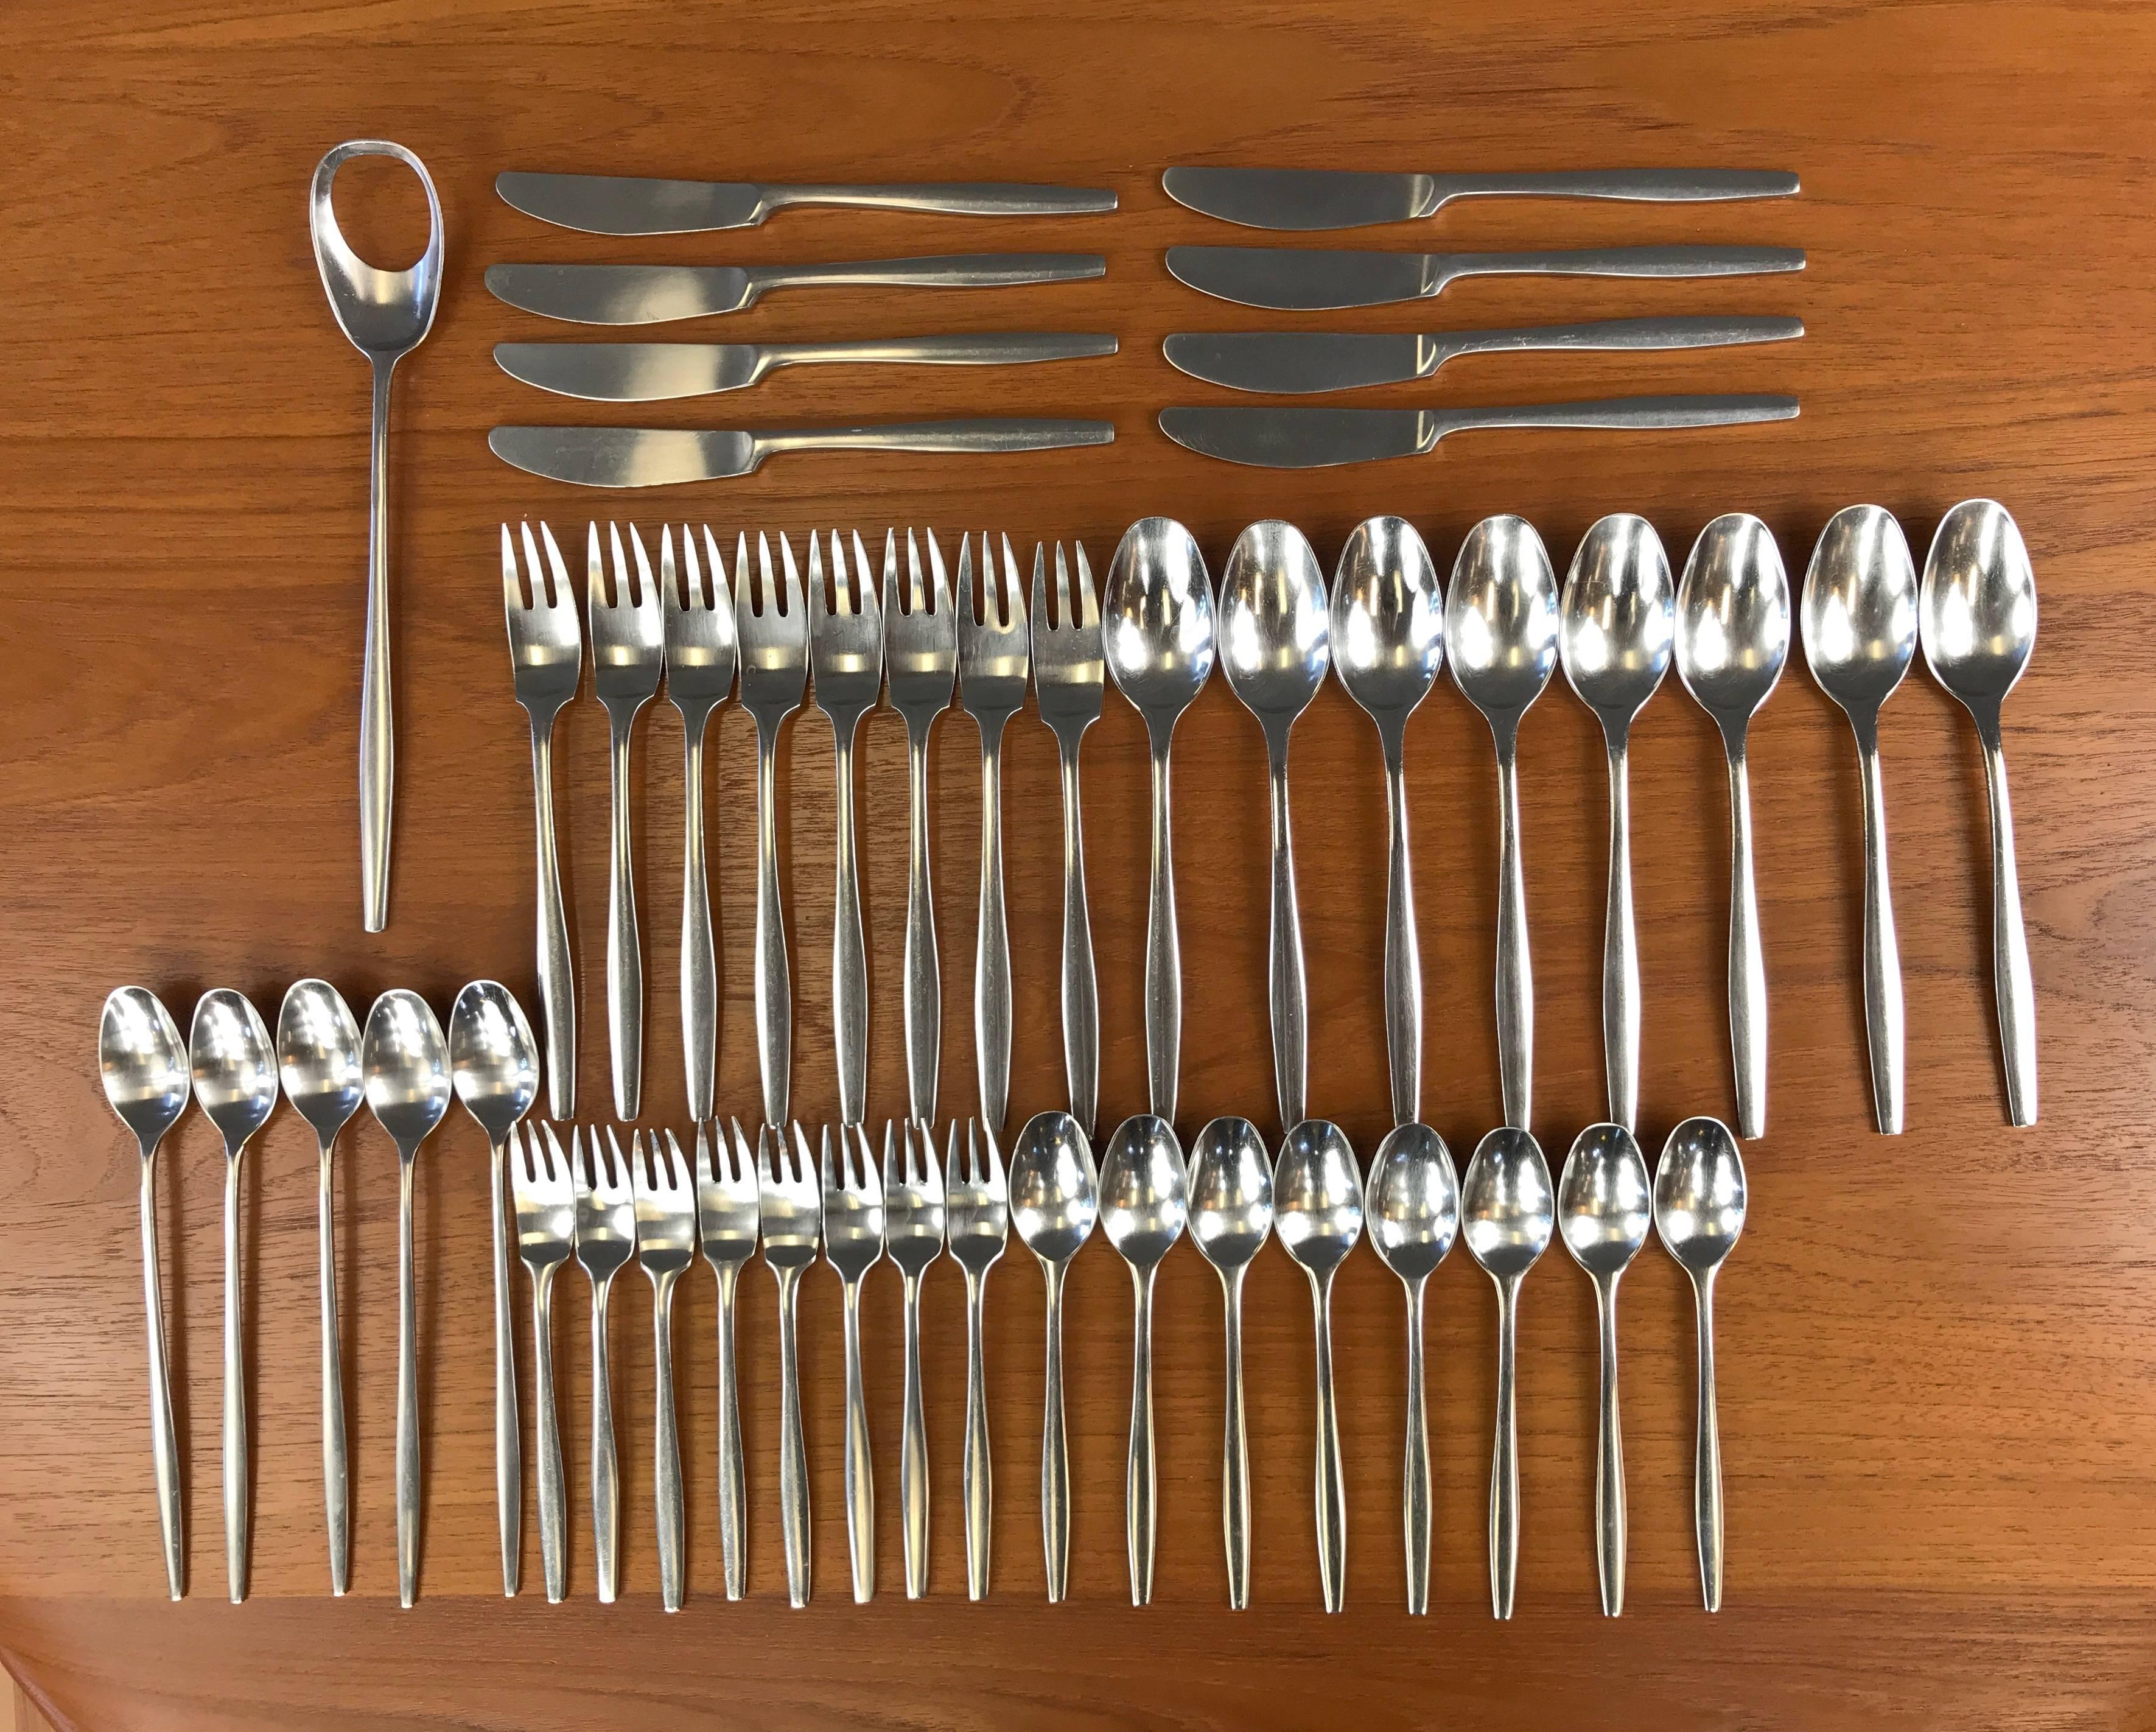 A vintage “Variation V” 46-piece stainless steel flatware service for eight designed by Jens Quistgaard for Dansk Designs in 1957.

Perfectly balanced, with a slender handle and elegantly tapered waist. The forks and serving utensil in particular